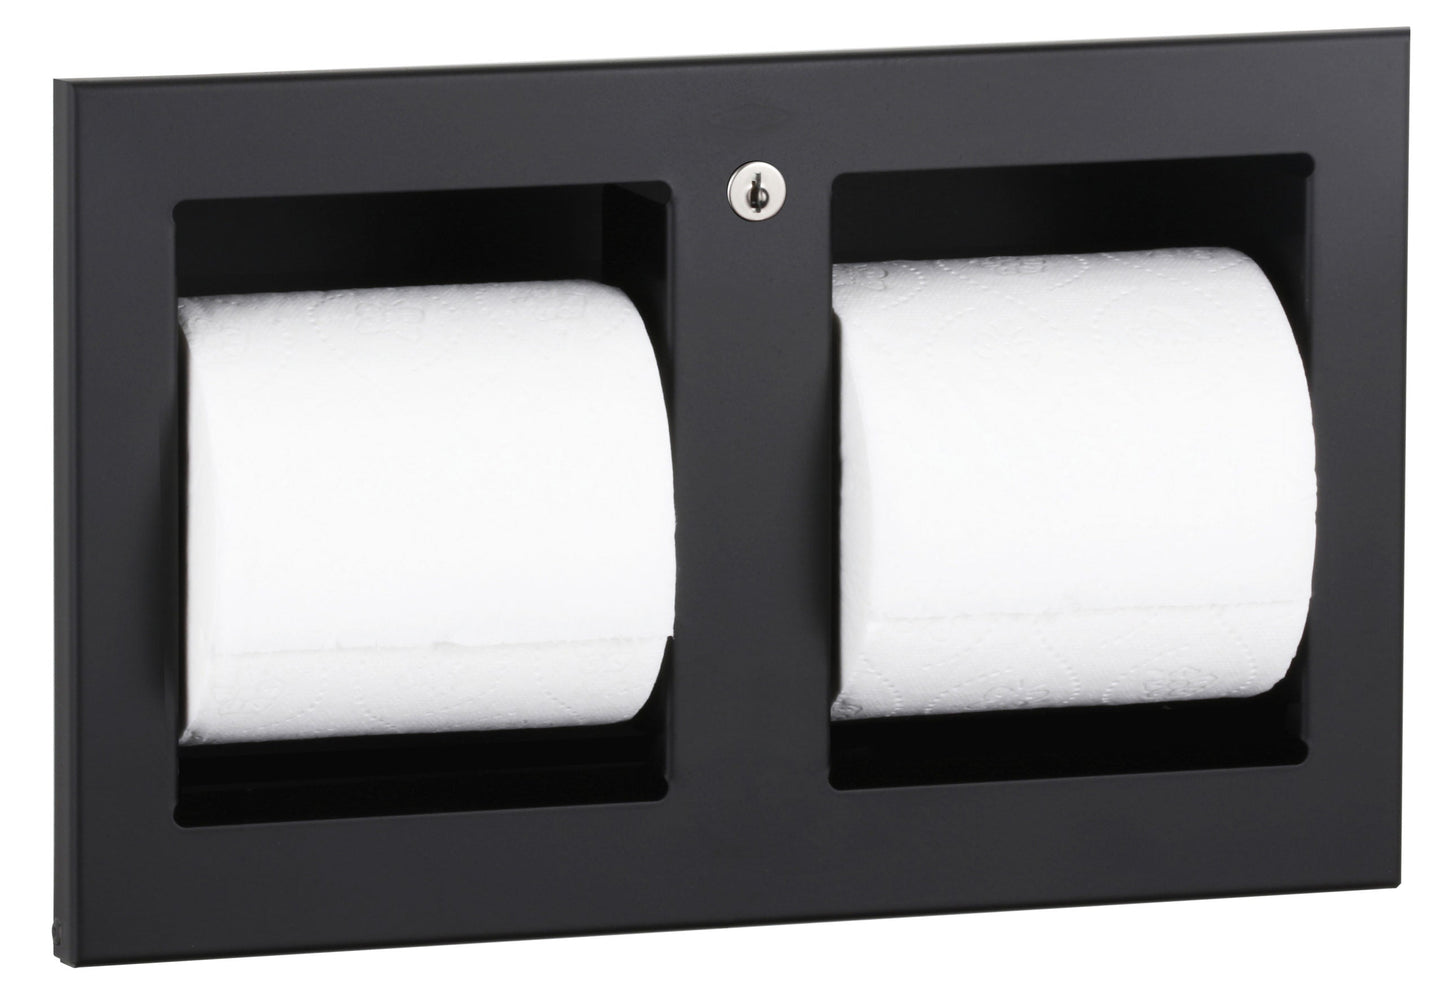 The Bobrick B-35883 is a recessed toilet tissue dispenser in stainless steel with a matte black finish.